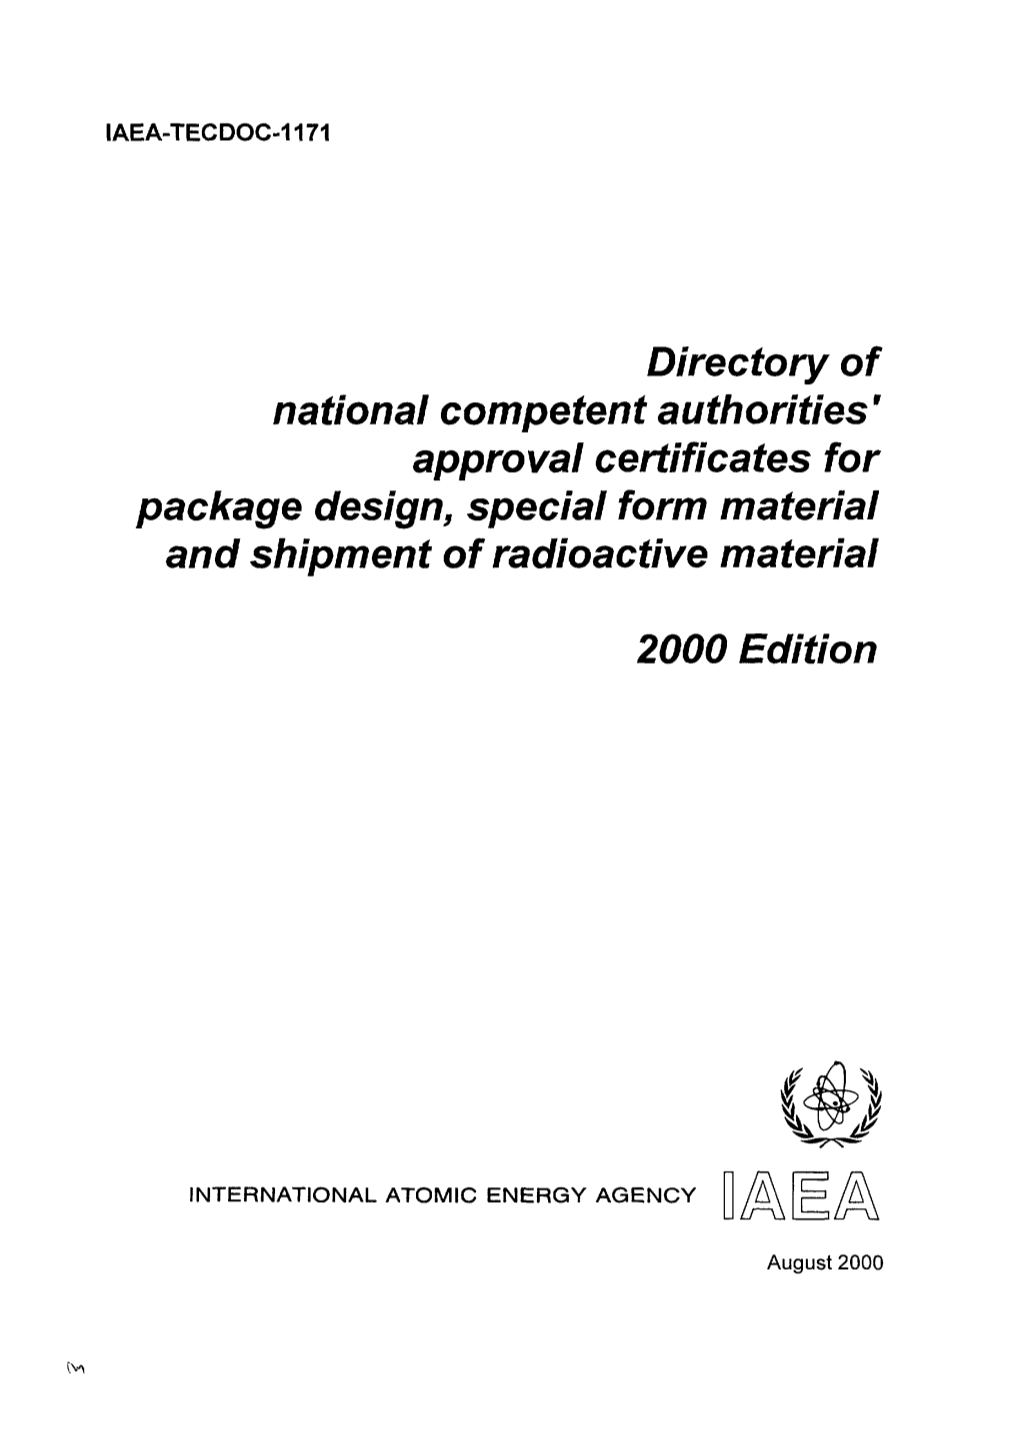 National Competent Authorities' Approval Certificates for Package Design, Special Form Material and Shipment of Radioactive Material